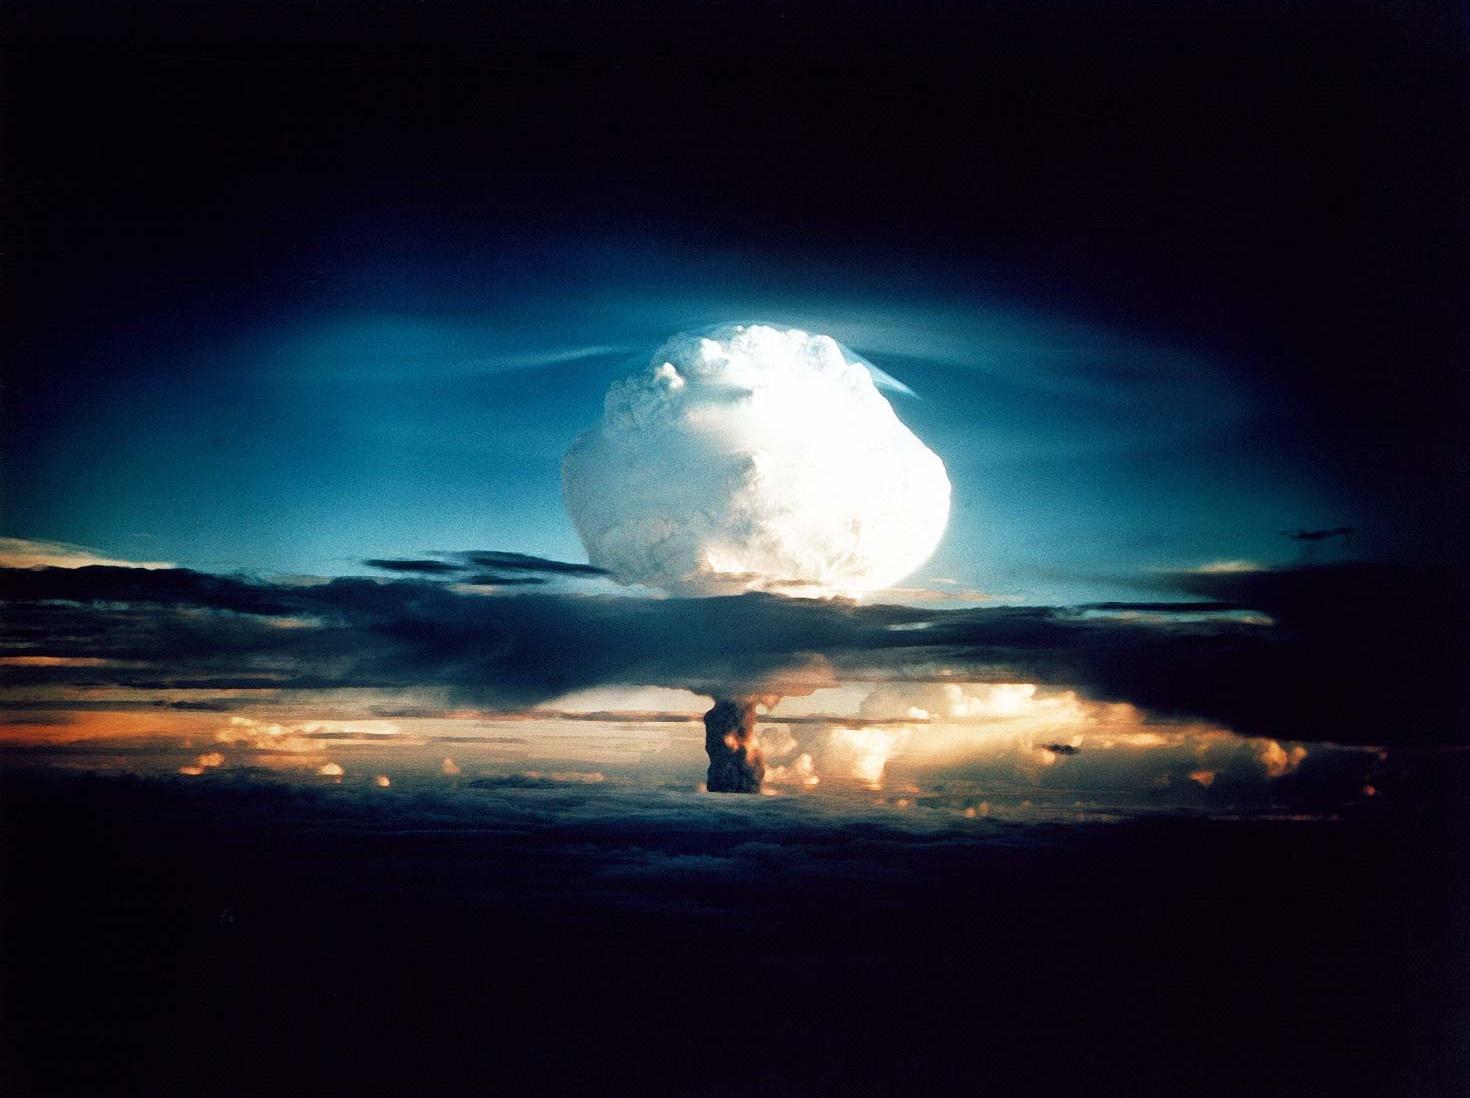 Nuclear-free world: enhanced security or total chaos?